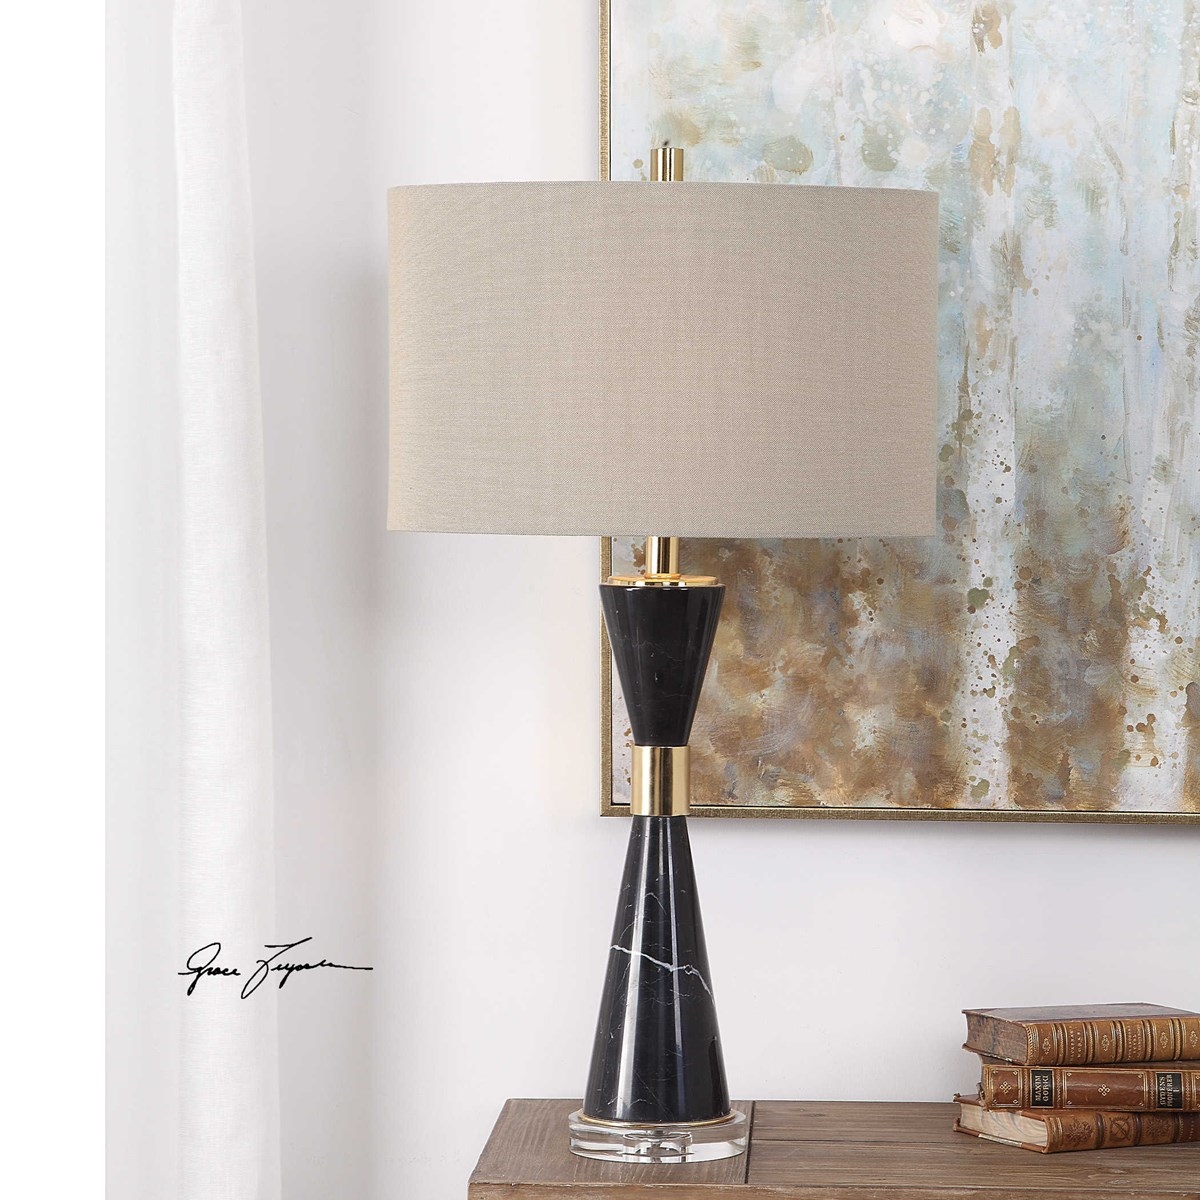 Alastair Black Marble Hourglass Table Lamp - #27886 - Image 2